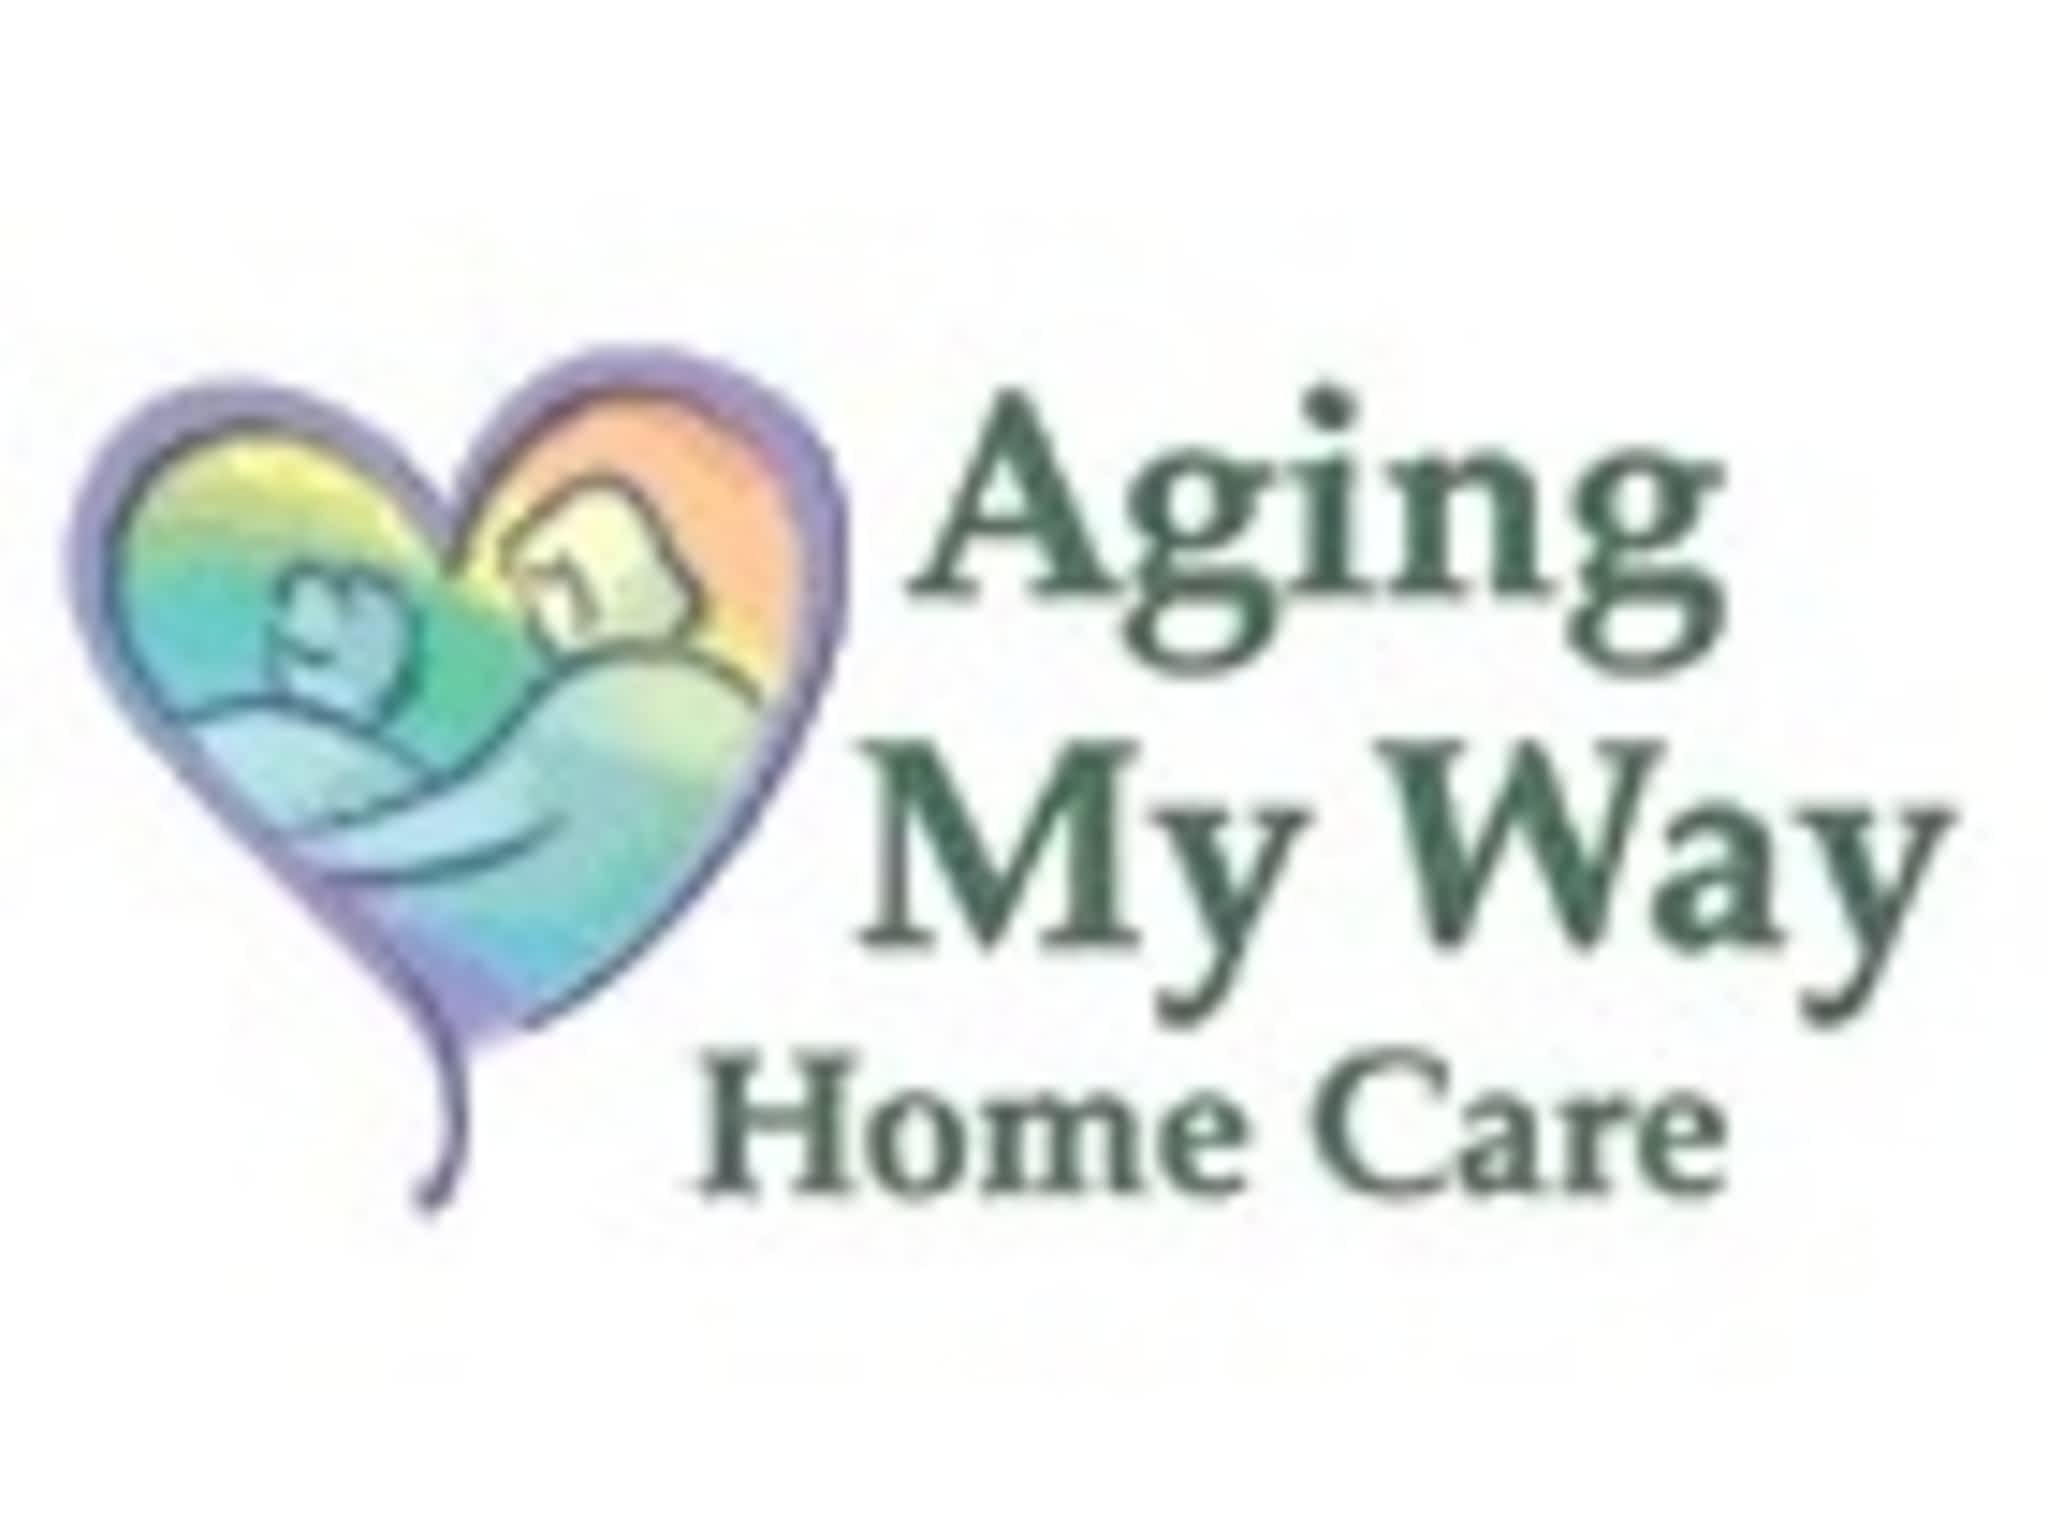 photo Aging My Way Home Care Inc